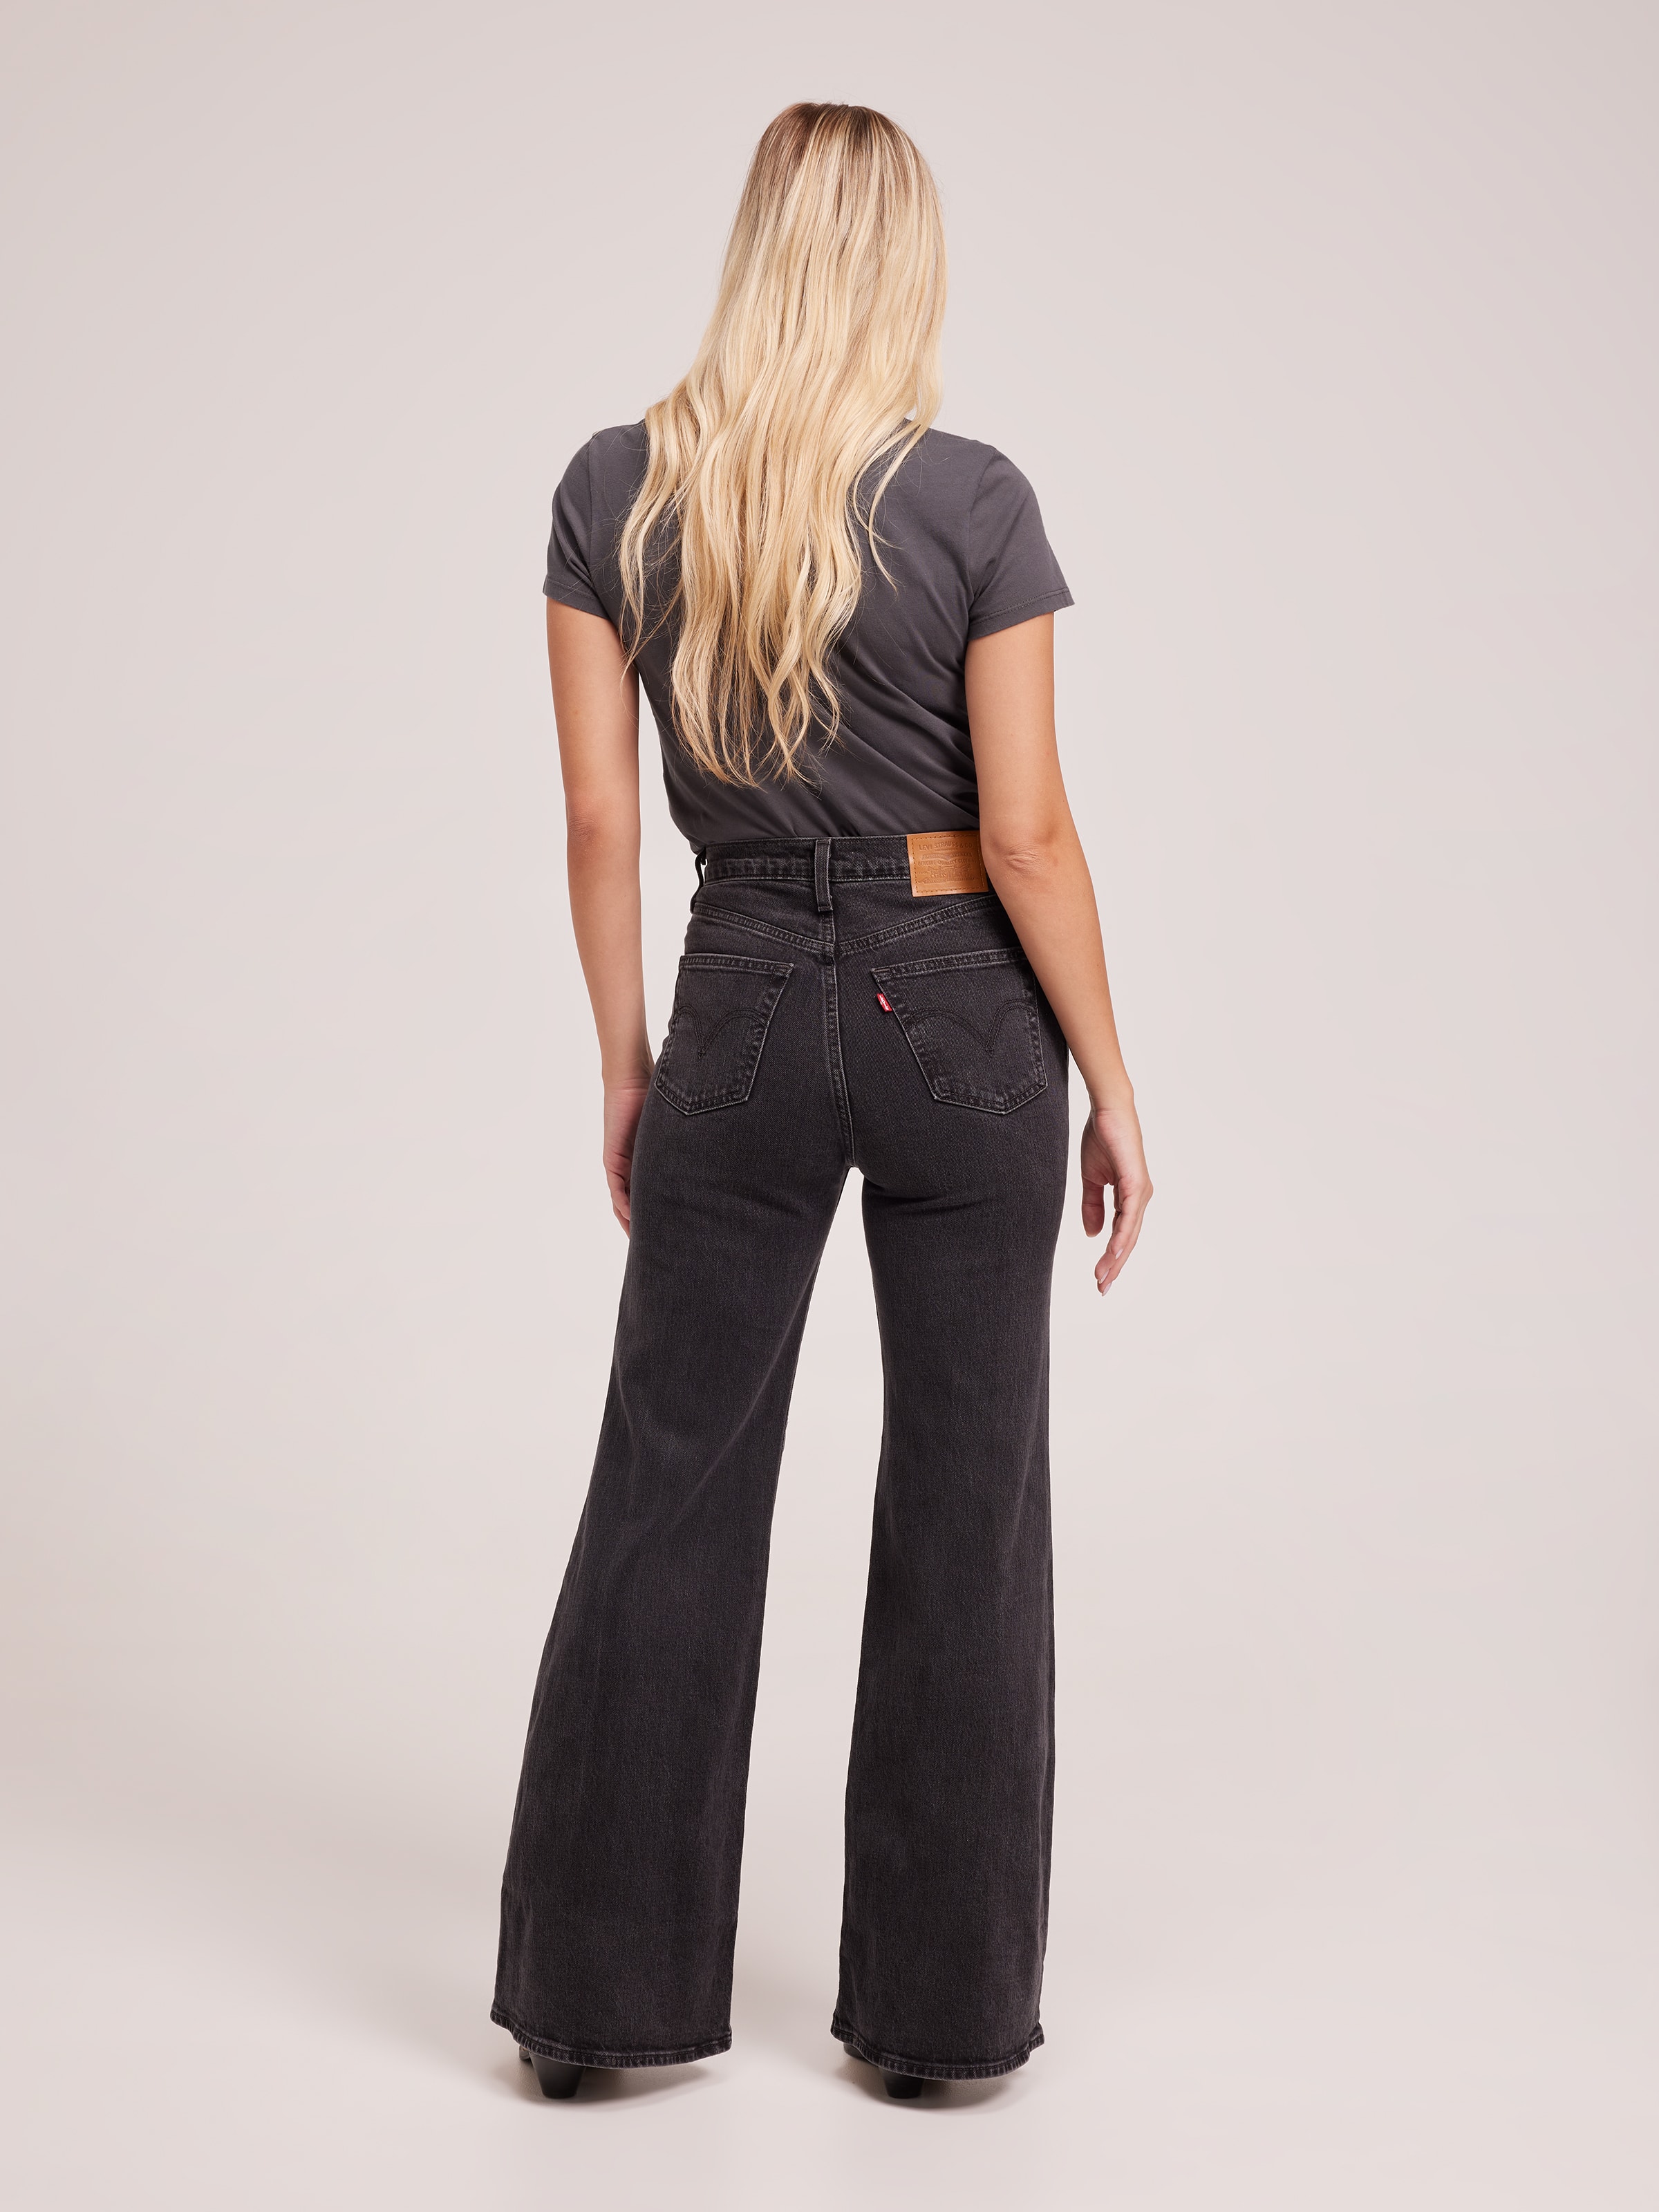 Ribcage Bells Jean In On The Town No Crackle - Just Jeans Online